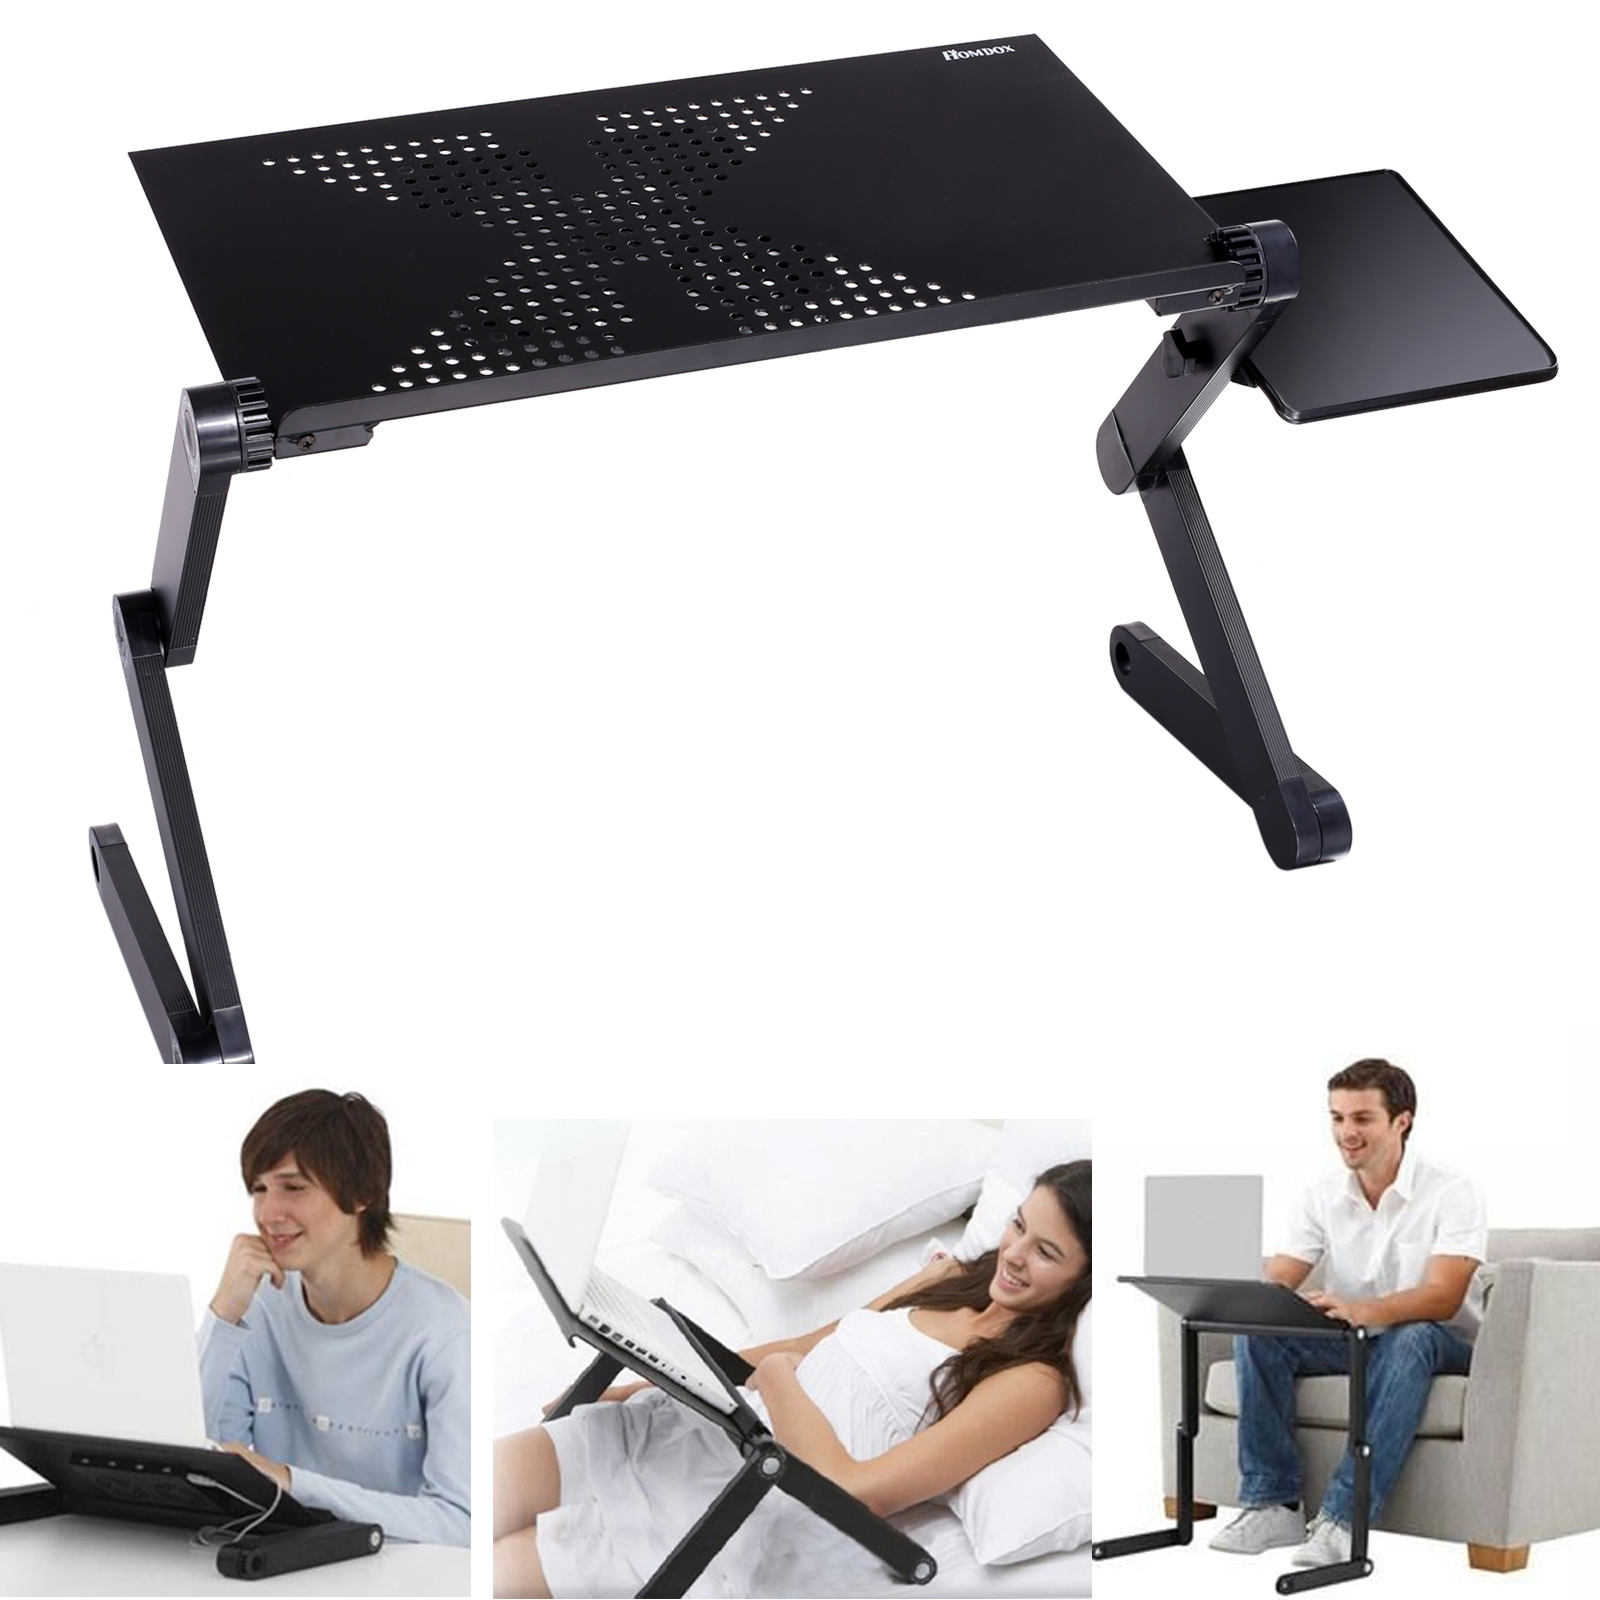 Homdox Black 360 Degree Adjustable Protable Laptop Stand Desk table for bed - image 1 of 7